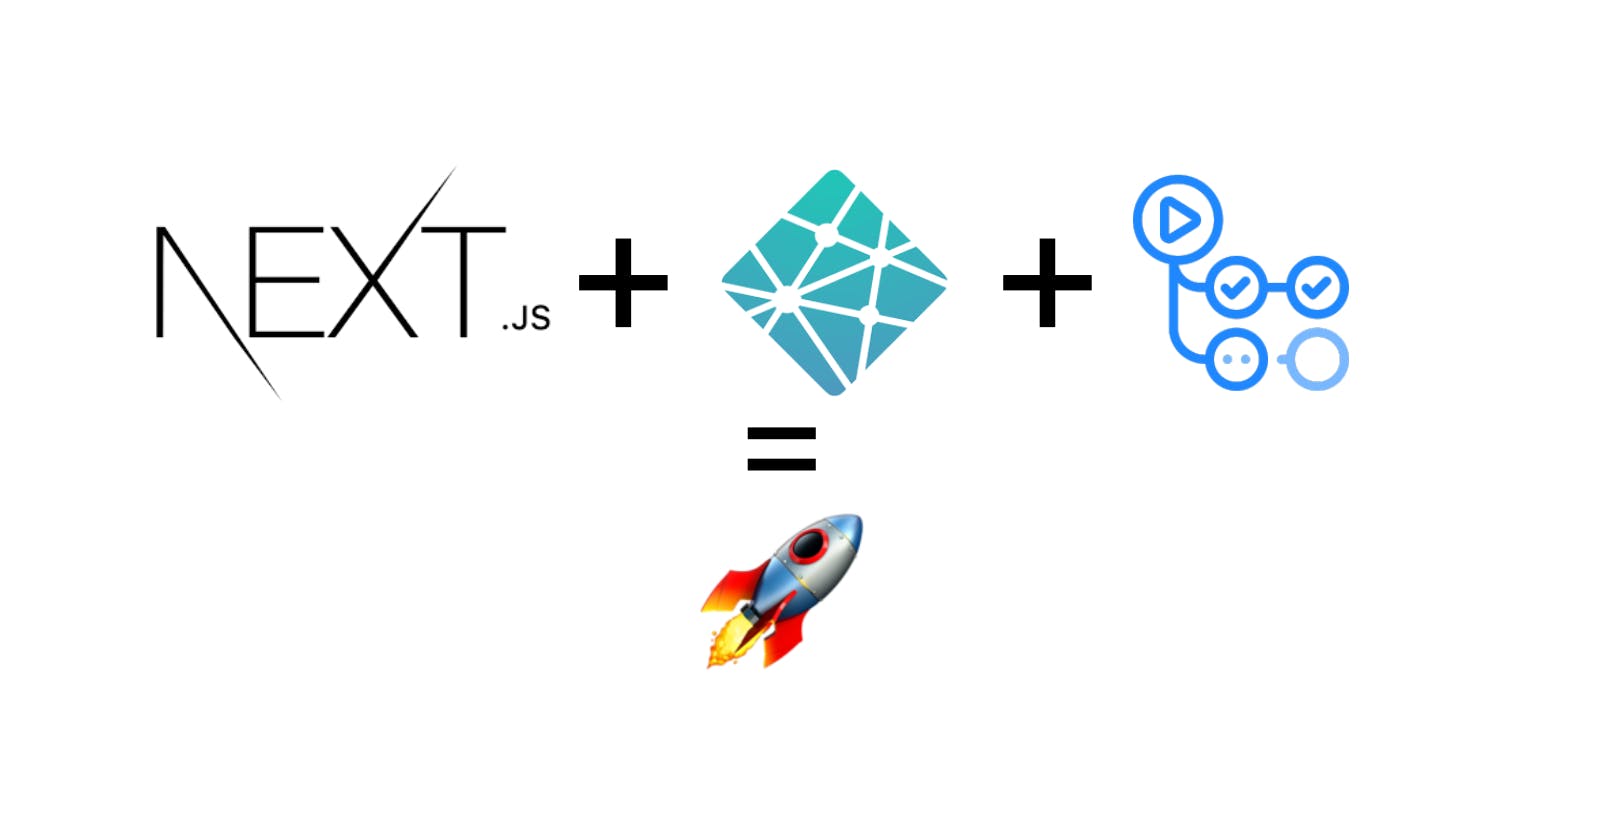 How to deploy your Next.js app on Netlify using Github Actions